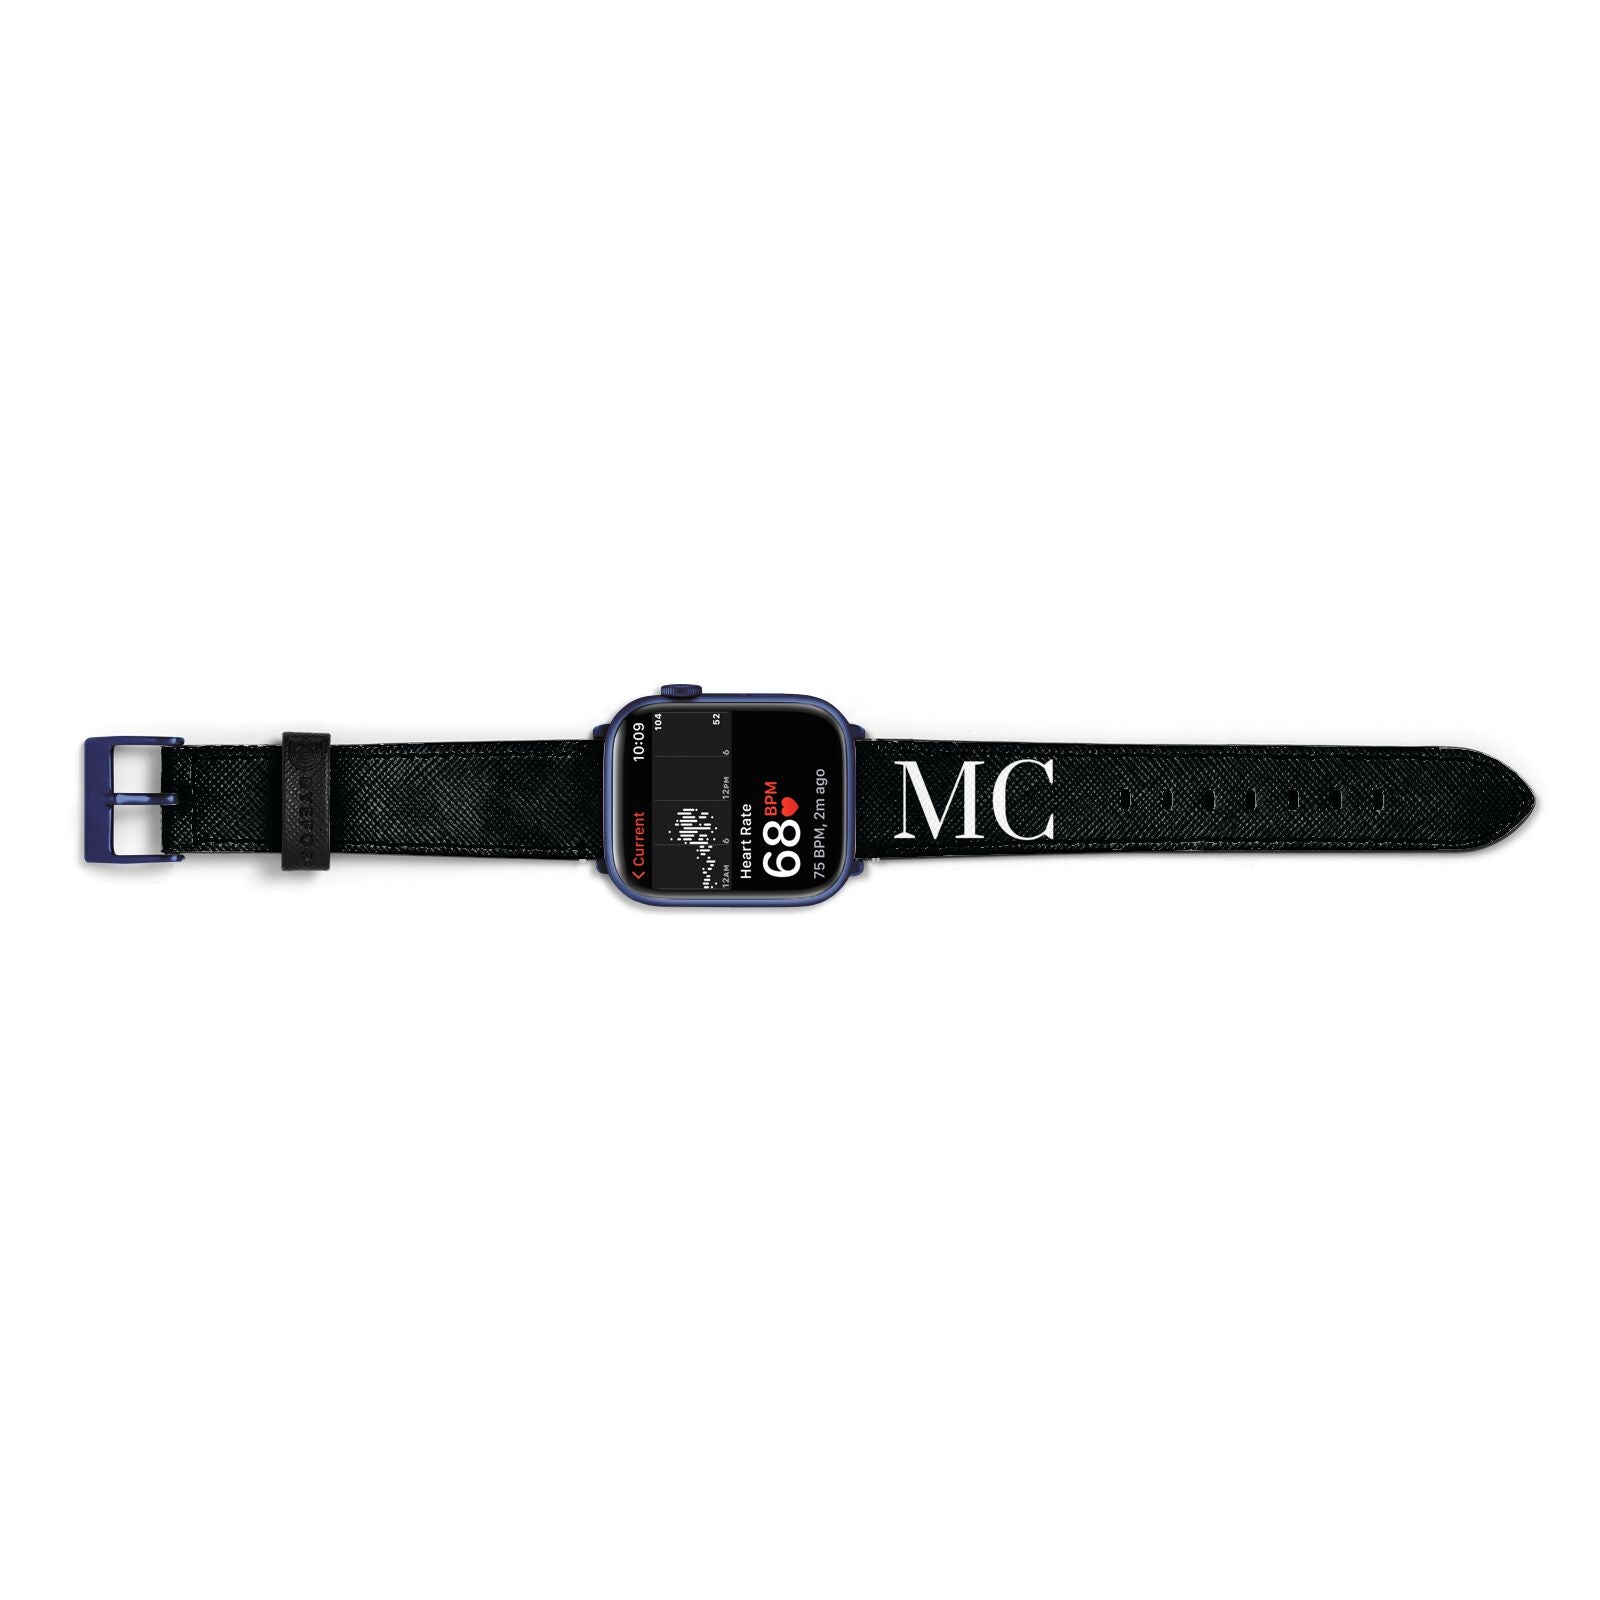 Initials Personalised 1 Apple Watch Strap Size 38mm Landscape Image Blue Hardware